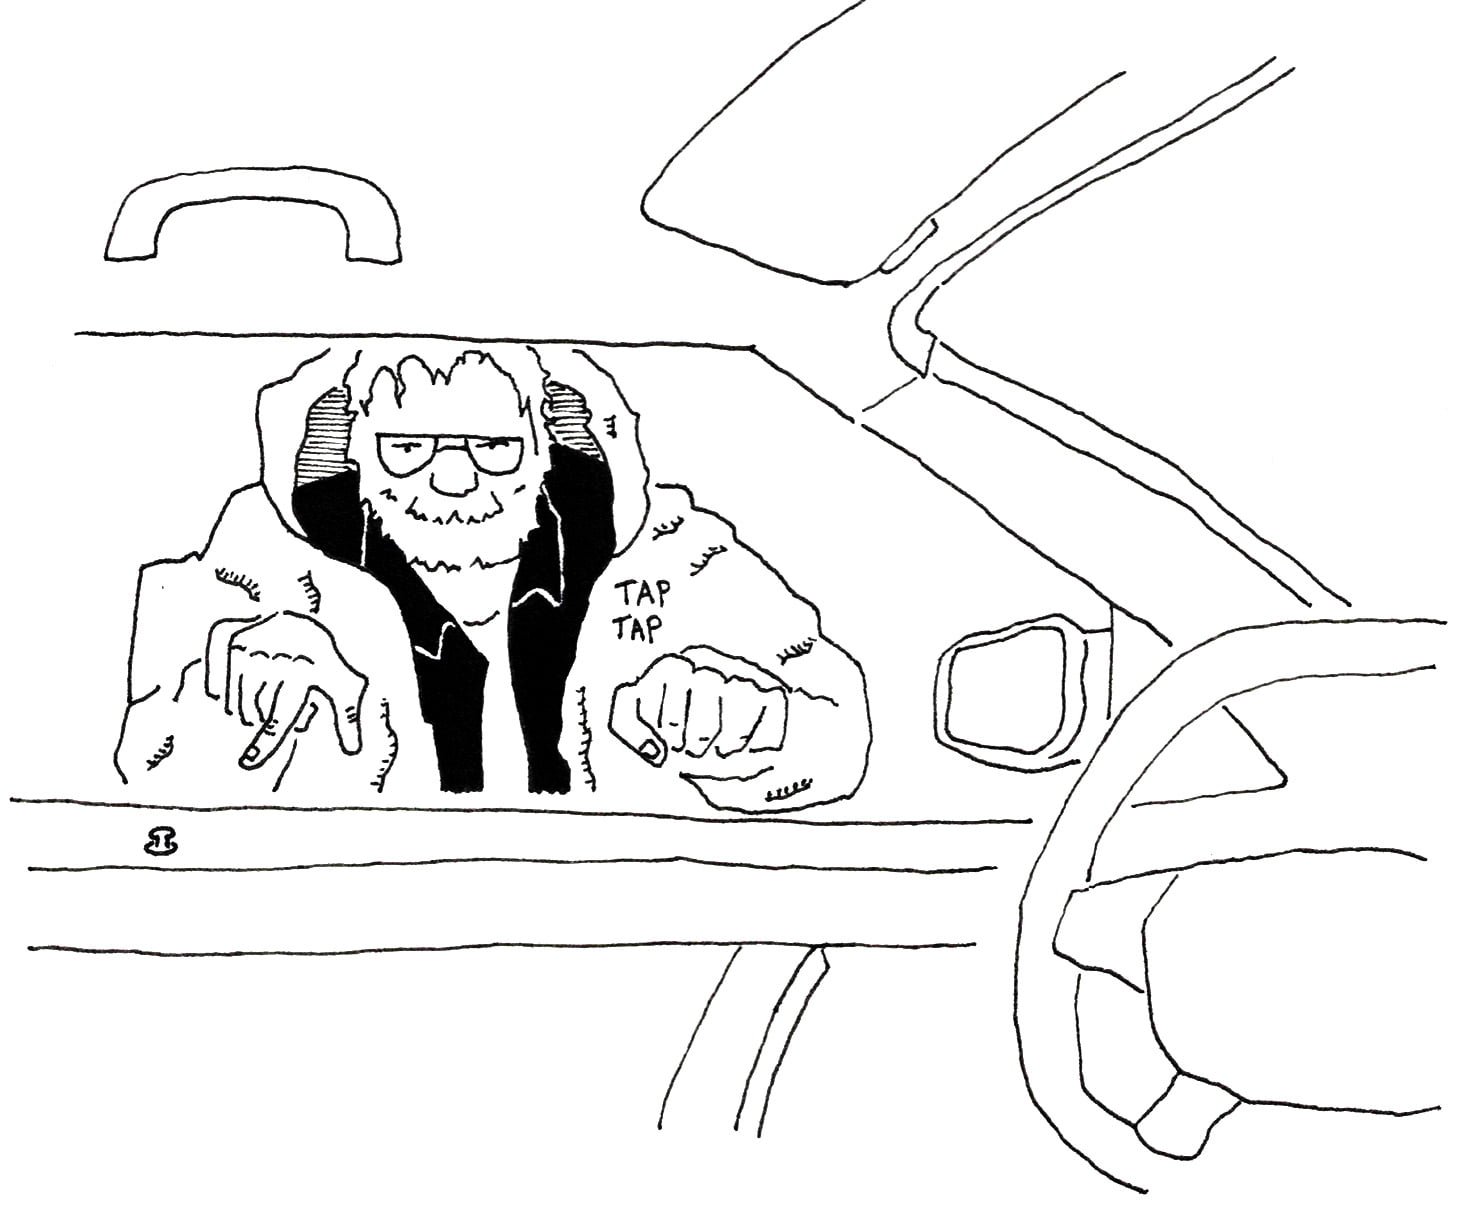 Black and white drawing of the view from the interior of a car looking through the driver's side window out at a man with a beard and glasses wearing a winter coat who is tapping on the window and motioning to unlock the door.